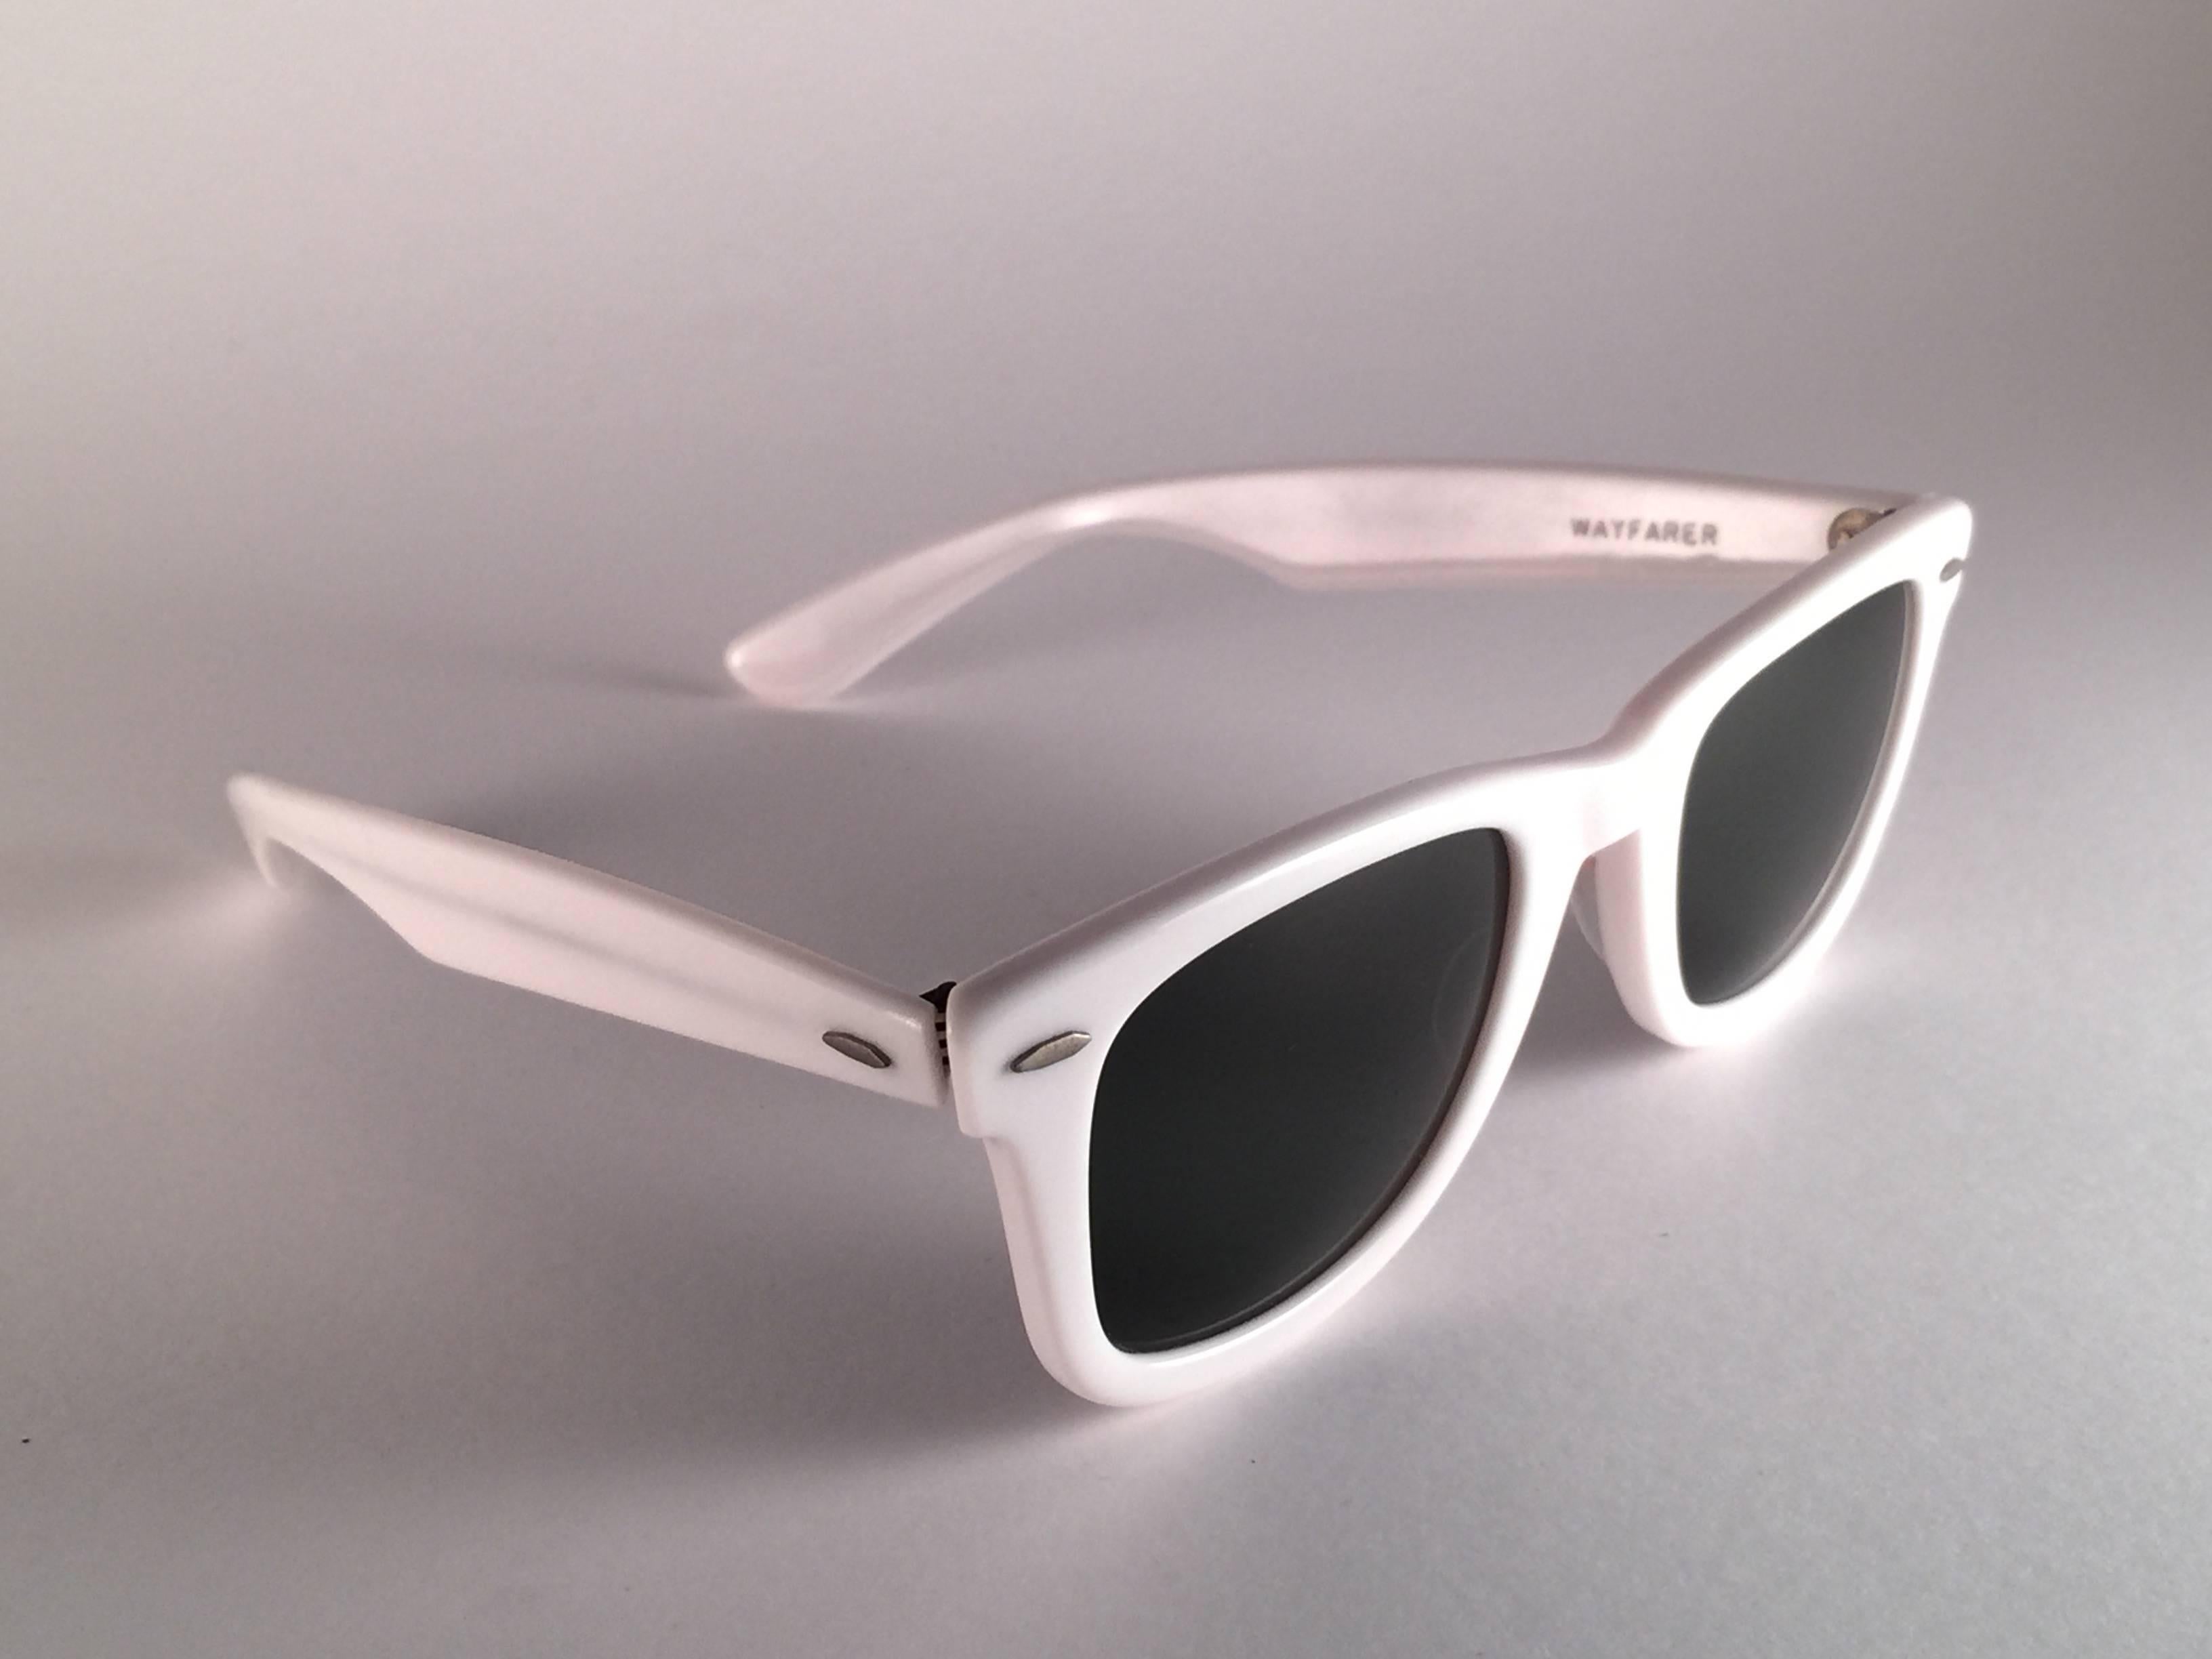 New classic Wayfarer in white. B&L etched in both G15 grey lenses. Please notice that this item is nearly 40 years old and could show some storage wear.

New, ever worn or displayed.